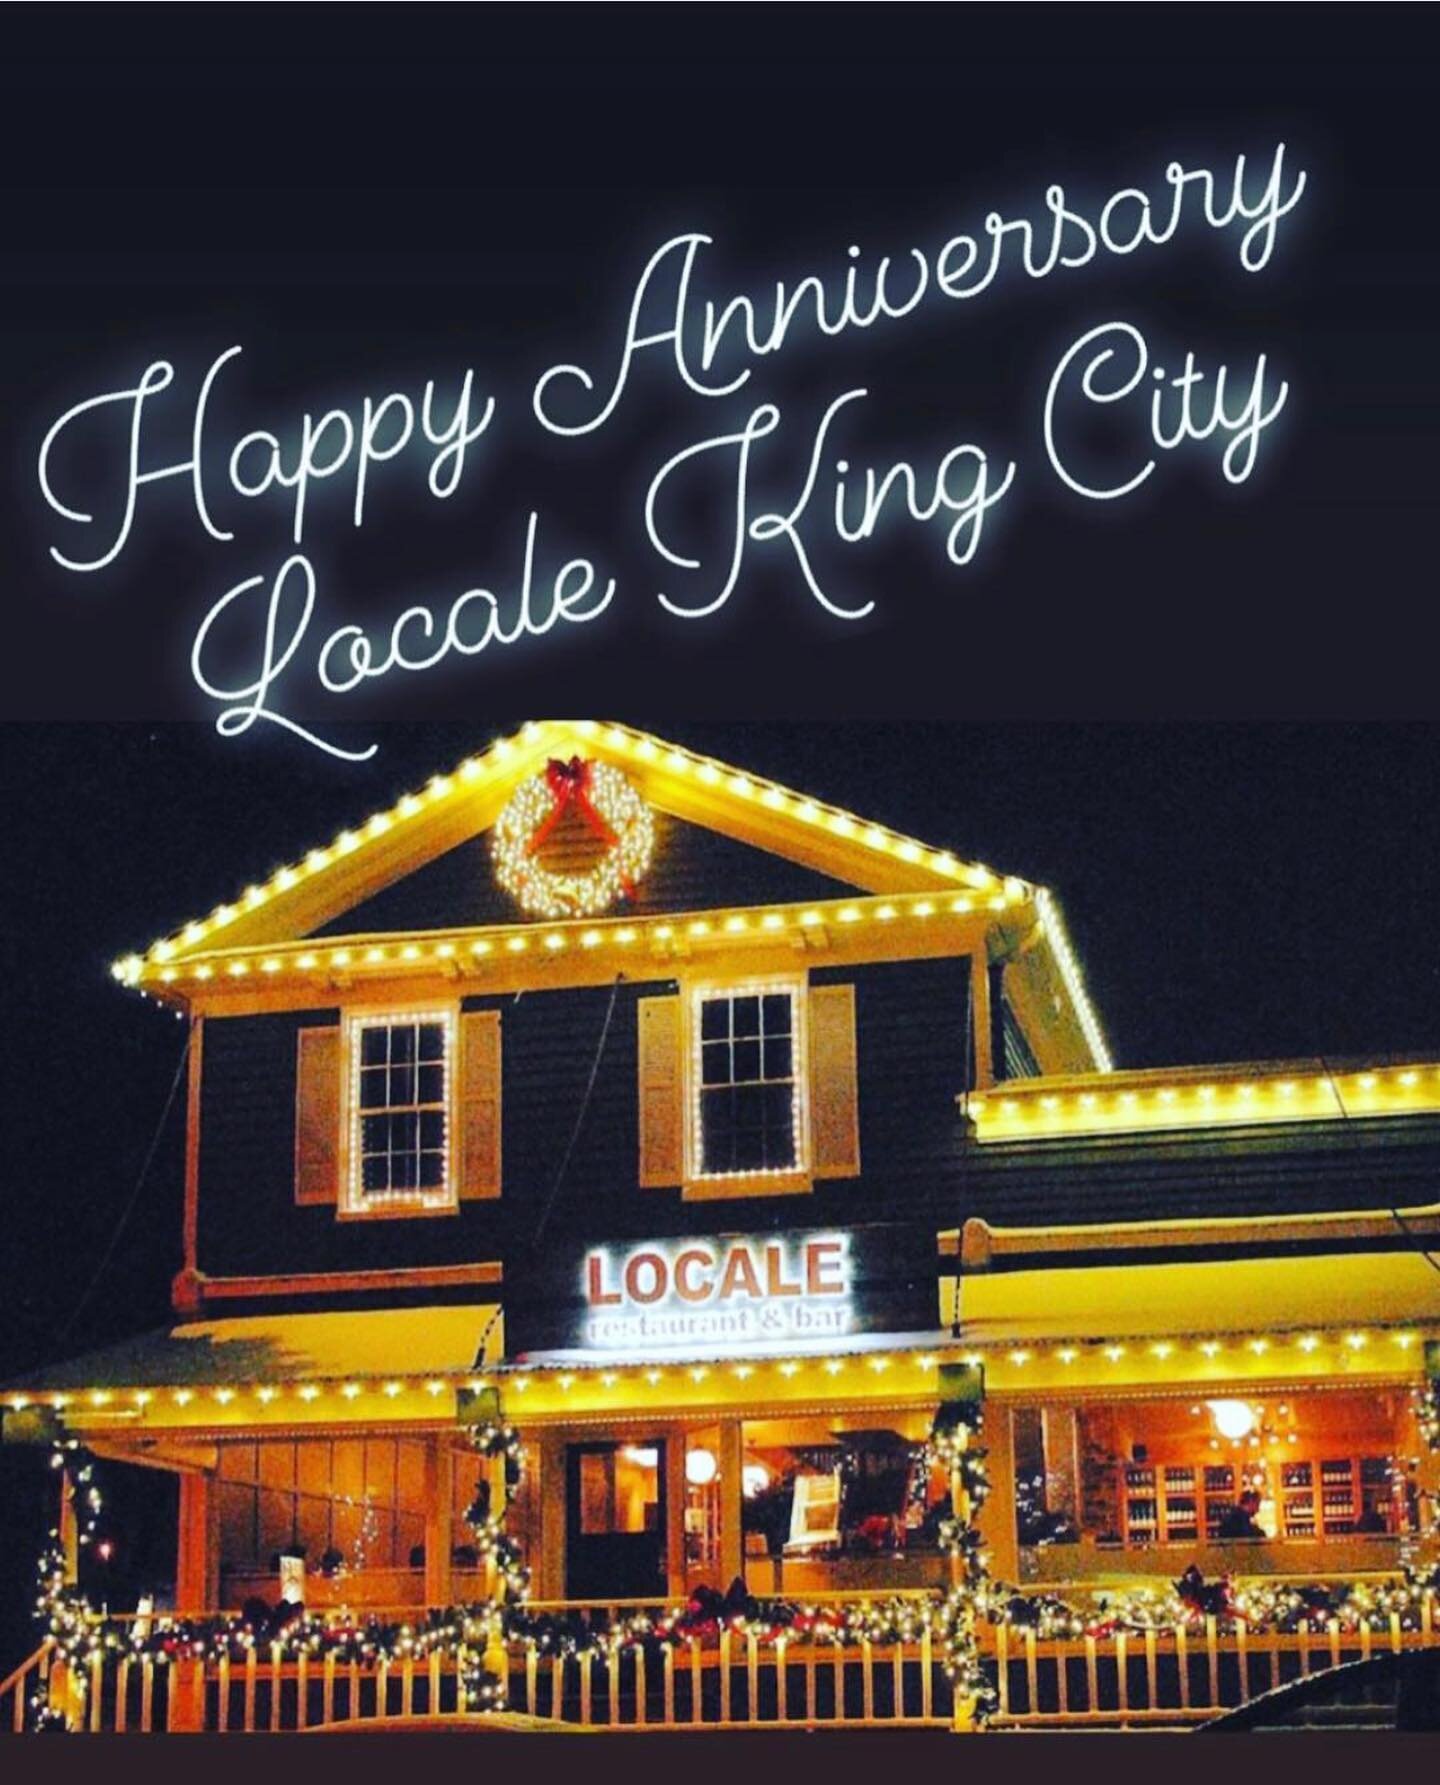 Celebration and Lockdown

7 years ago today we opened our doors at the busiest and craziest time of the year!! They said we were nuts 😜 they weren&rsquo;t wrong #reataurantlife #youneedtobecrazy

So to our beautiful community of King and our work fa